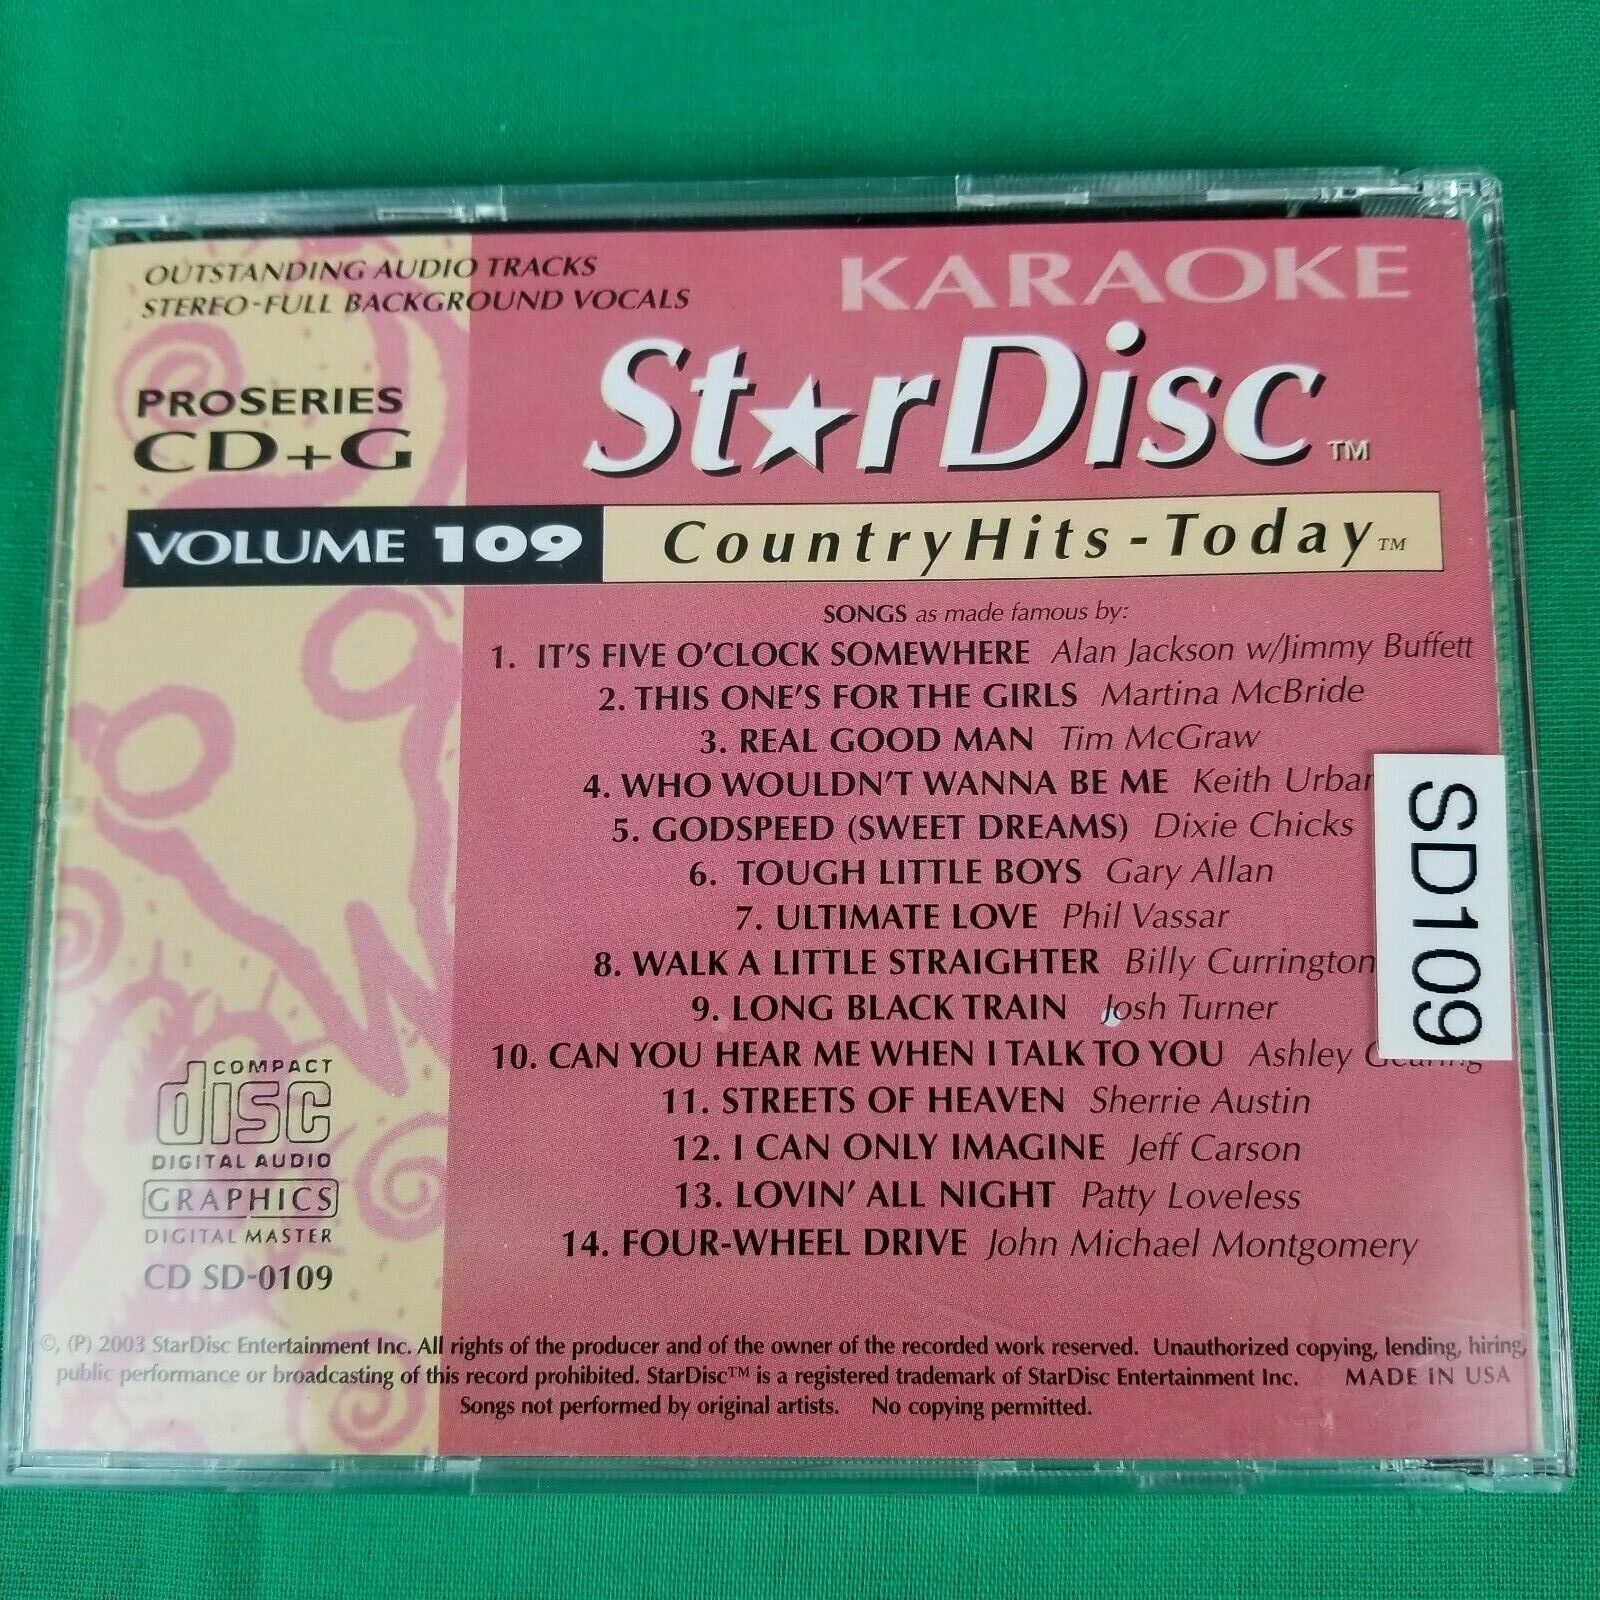 Pre-Owned Lot of 2 StarDisc Karaoke Country Classics CD+G Volume 106 & 109 Star Disc - фотография #4